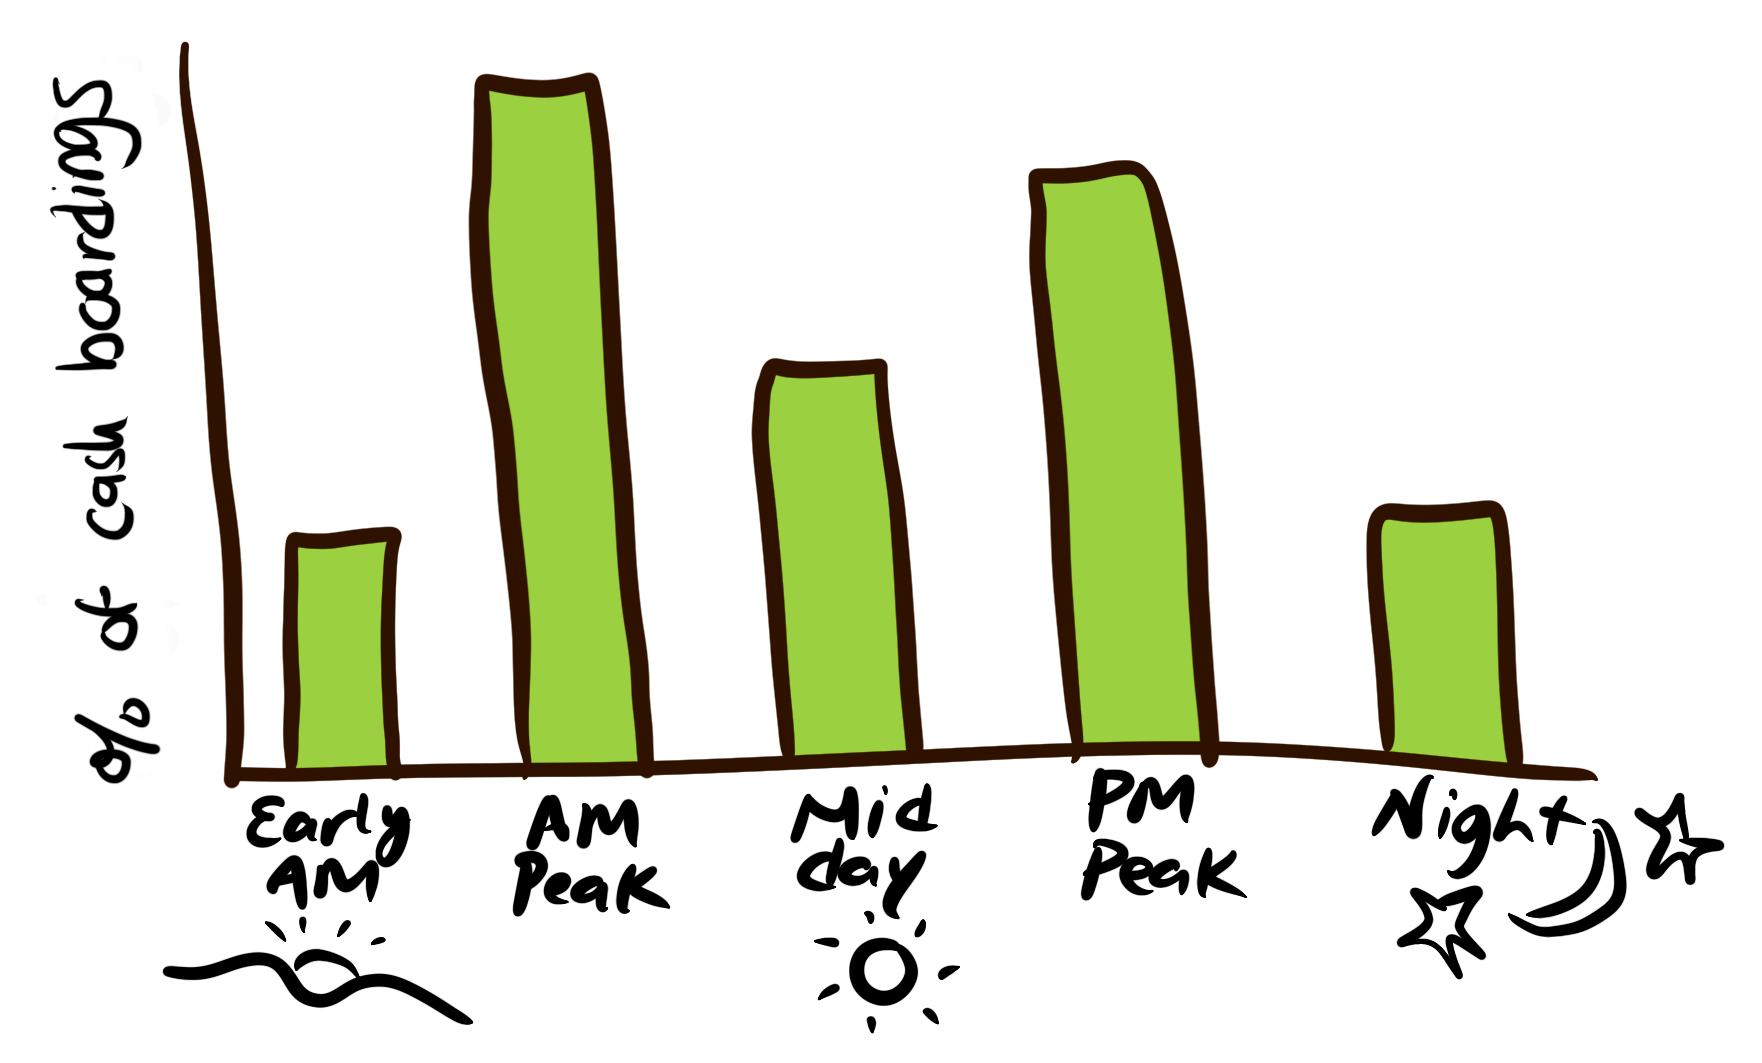 Sketch of a hypothetical bar chart showing boardings by time of day: a small amount in Early AM and Night, a large amount in AM and PM peak and a moderate about in Mid-Day.